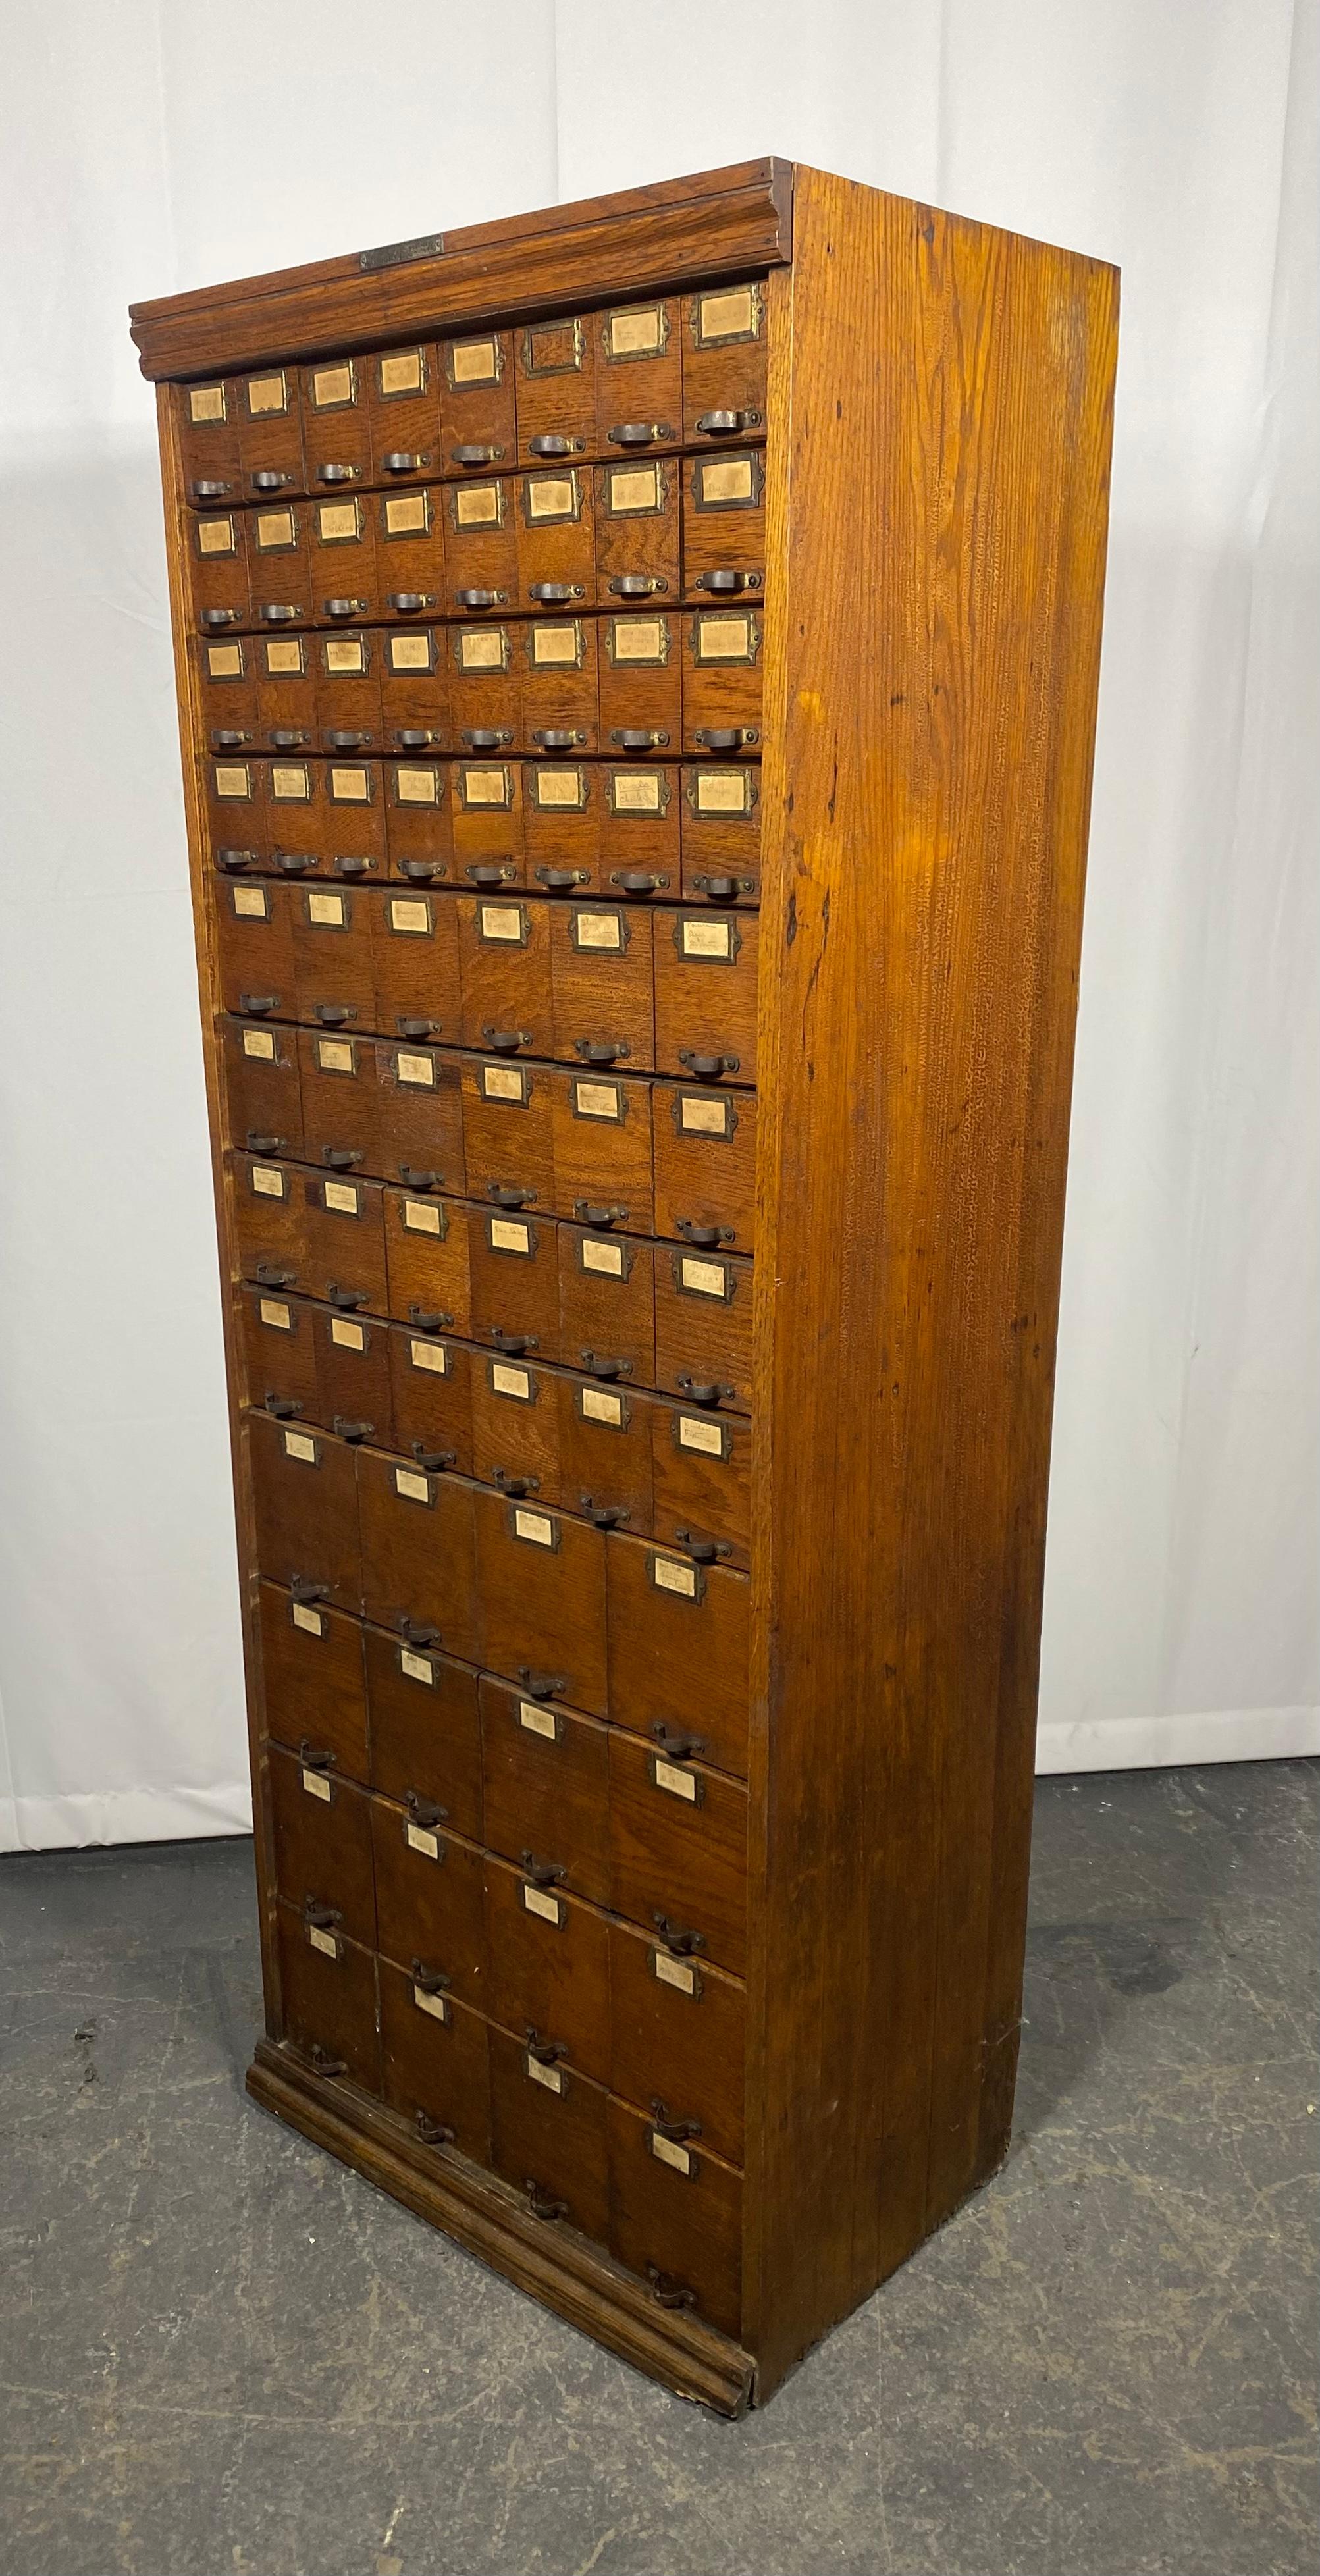 Antique Industrial Oak Multi-Drawer Hardware Store Cabinet by WC Heller.. Amazing patina ,proportion.. and design,, 72 drawers,, graduating in size.Oak fronts / galvanized tin drawers, MINOR RUST TO BACKSIDE ,, Hand delivery avail to New York City